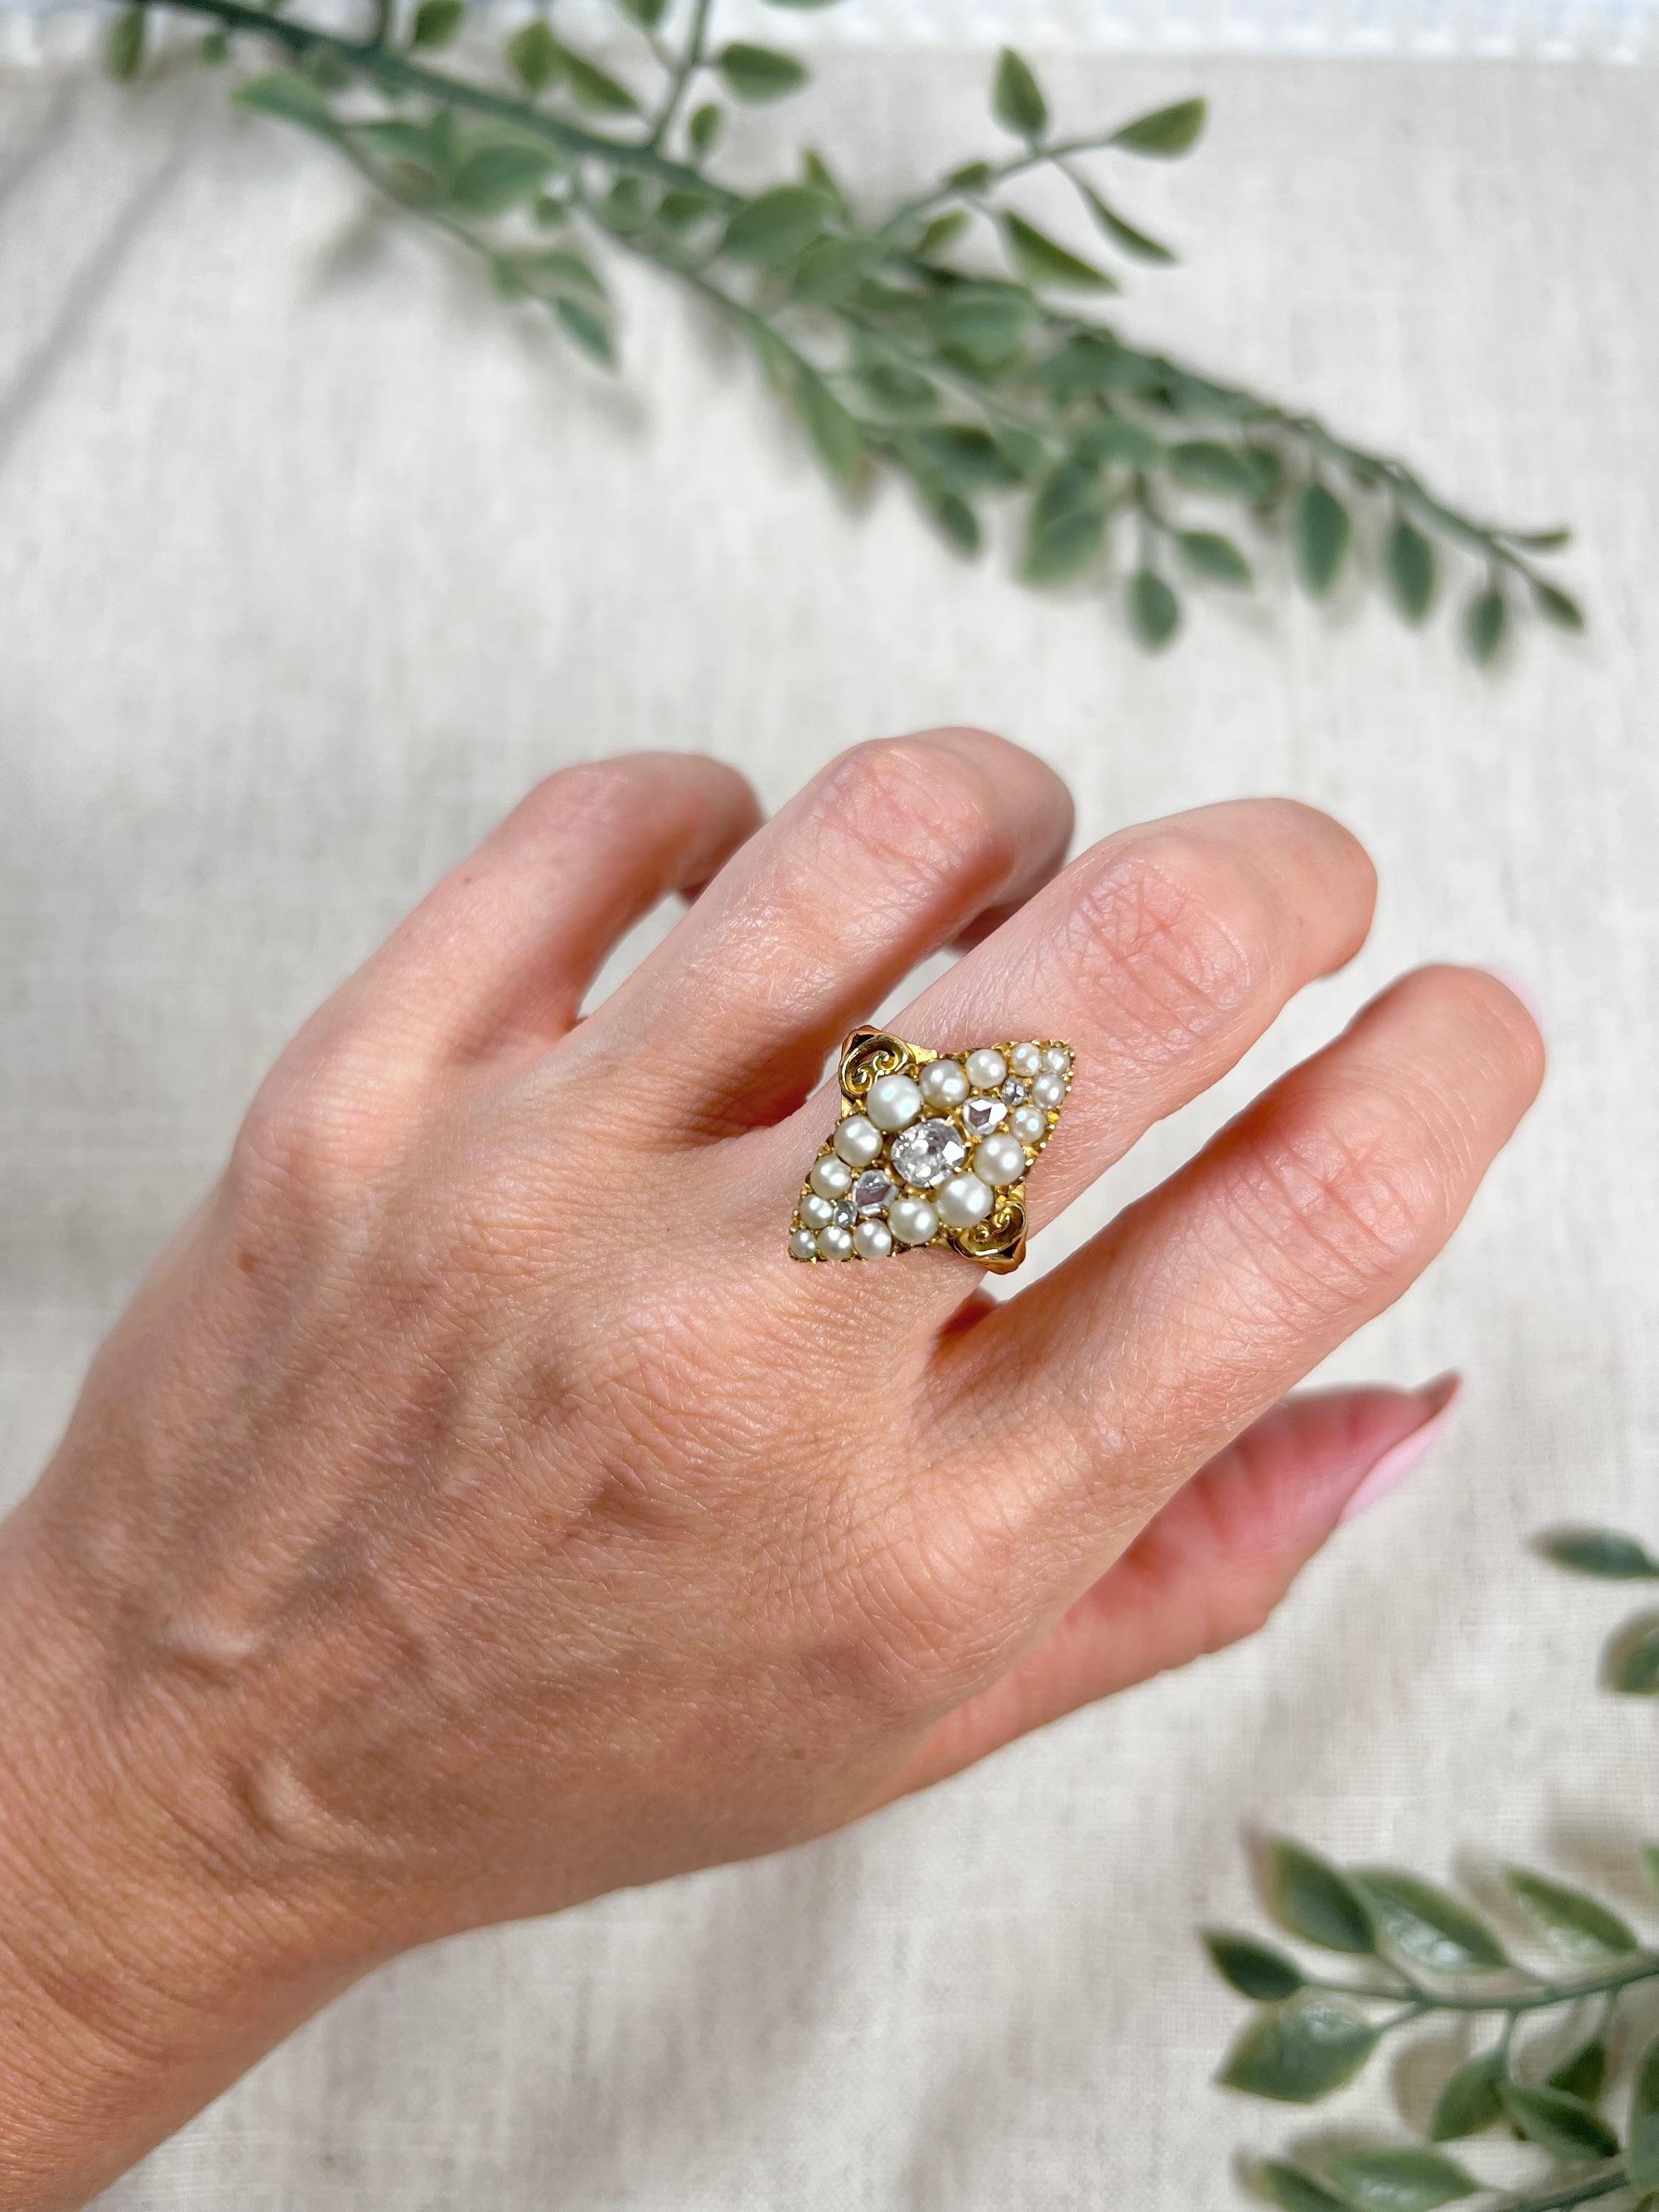 Antique Marquise Ring 

15ct Gold Tested

Circa 1860

Fabulous, 15ct yellow gold, early Victorian marquise/navette shaped ring. Set with five beautiful, old cut diamonds down the centre. Surrounded by a border of pretty, natural seed pearls &